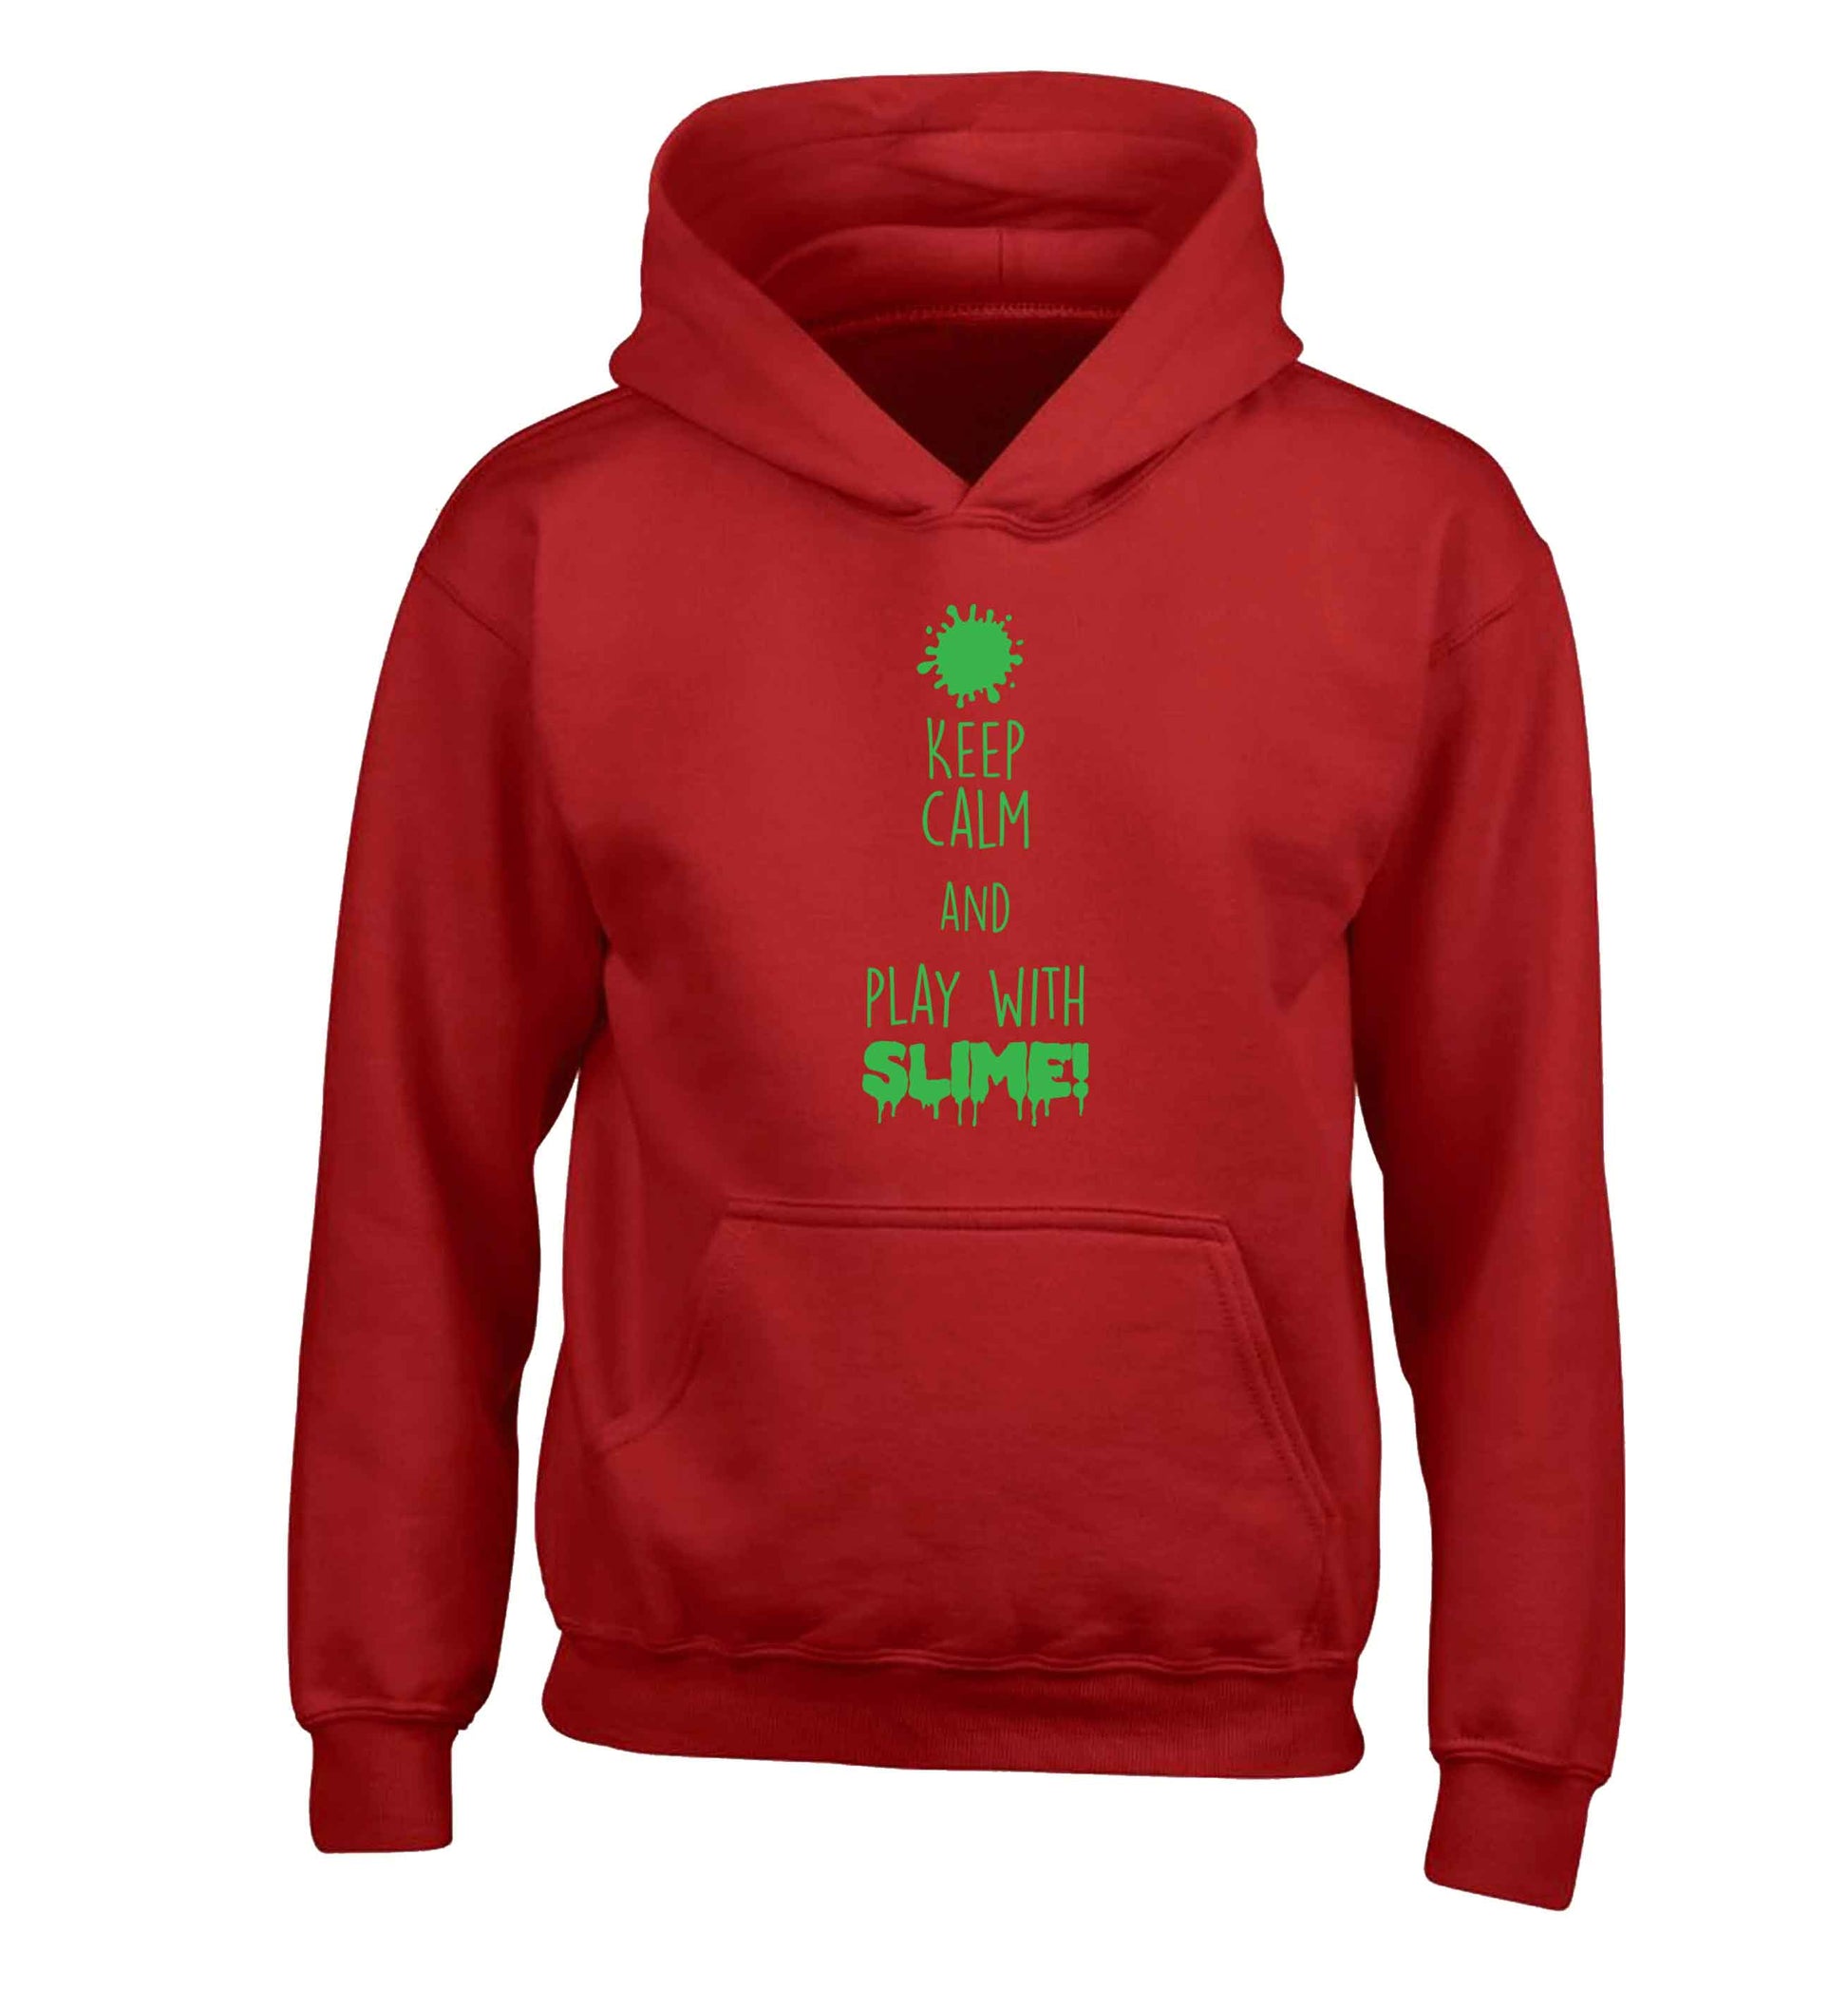 Neon green keep calm and play with slime!children's red hoodie 12-13 Years